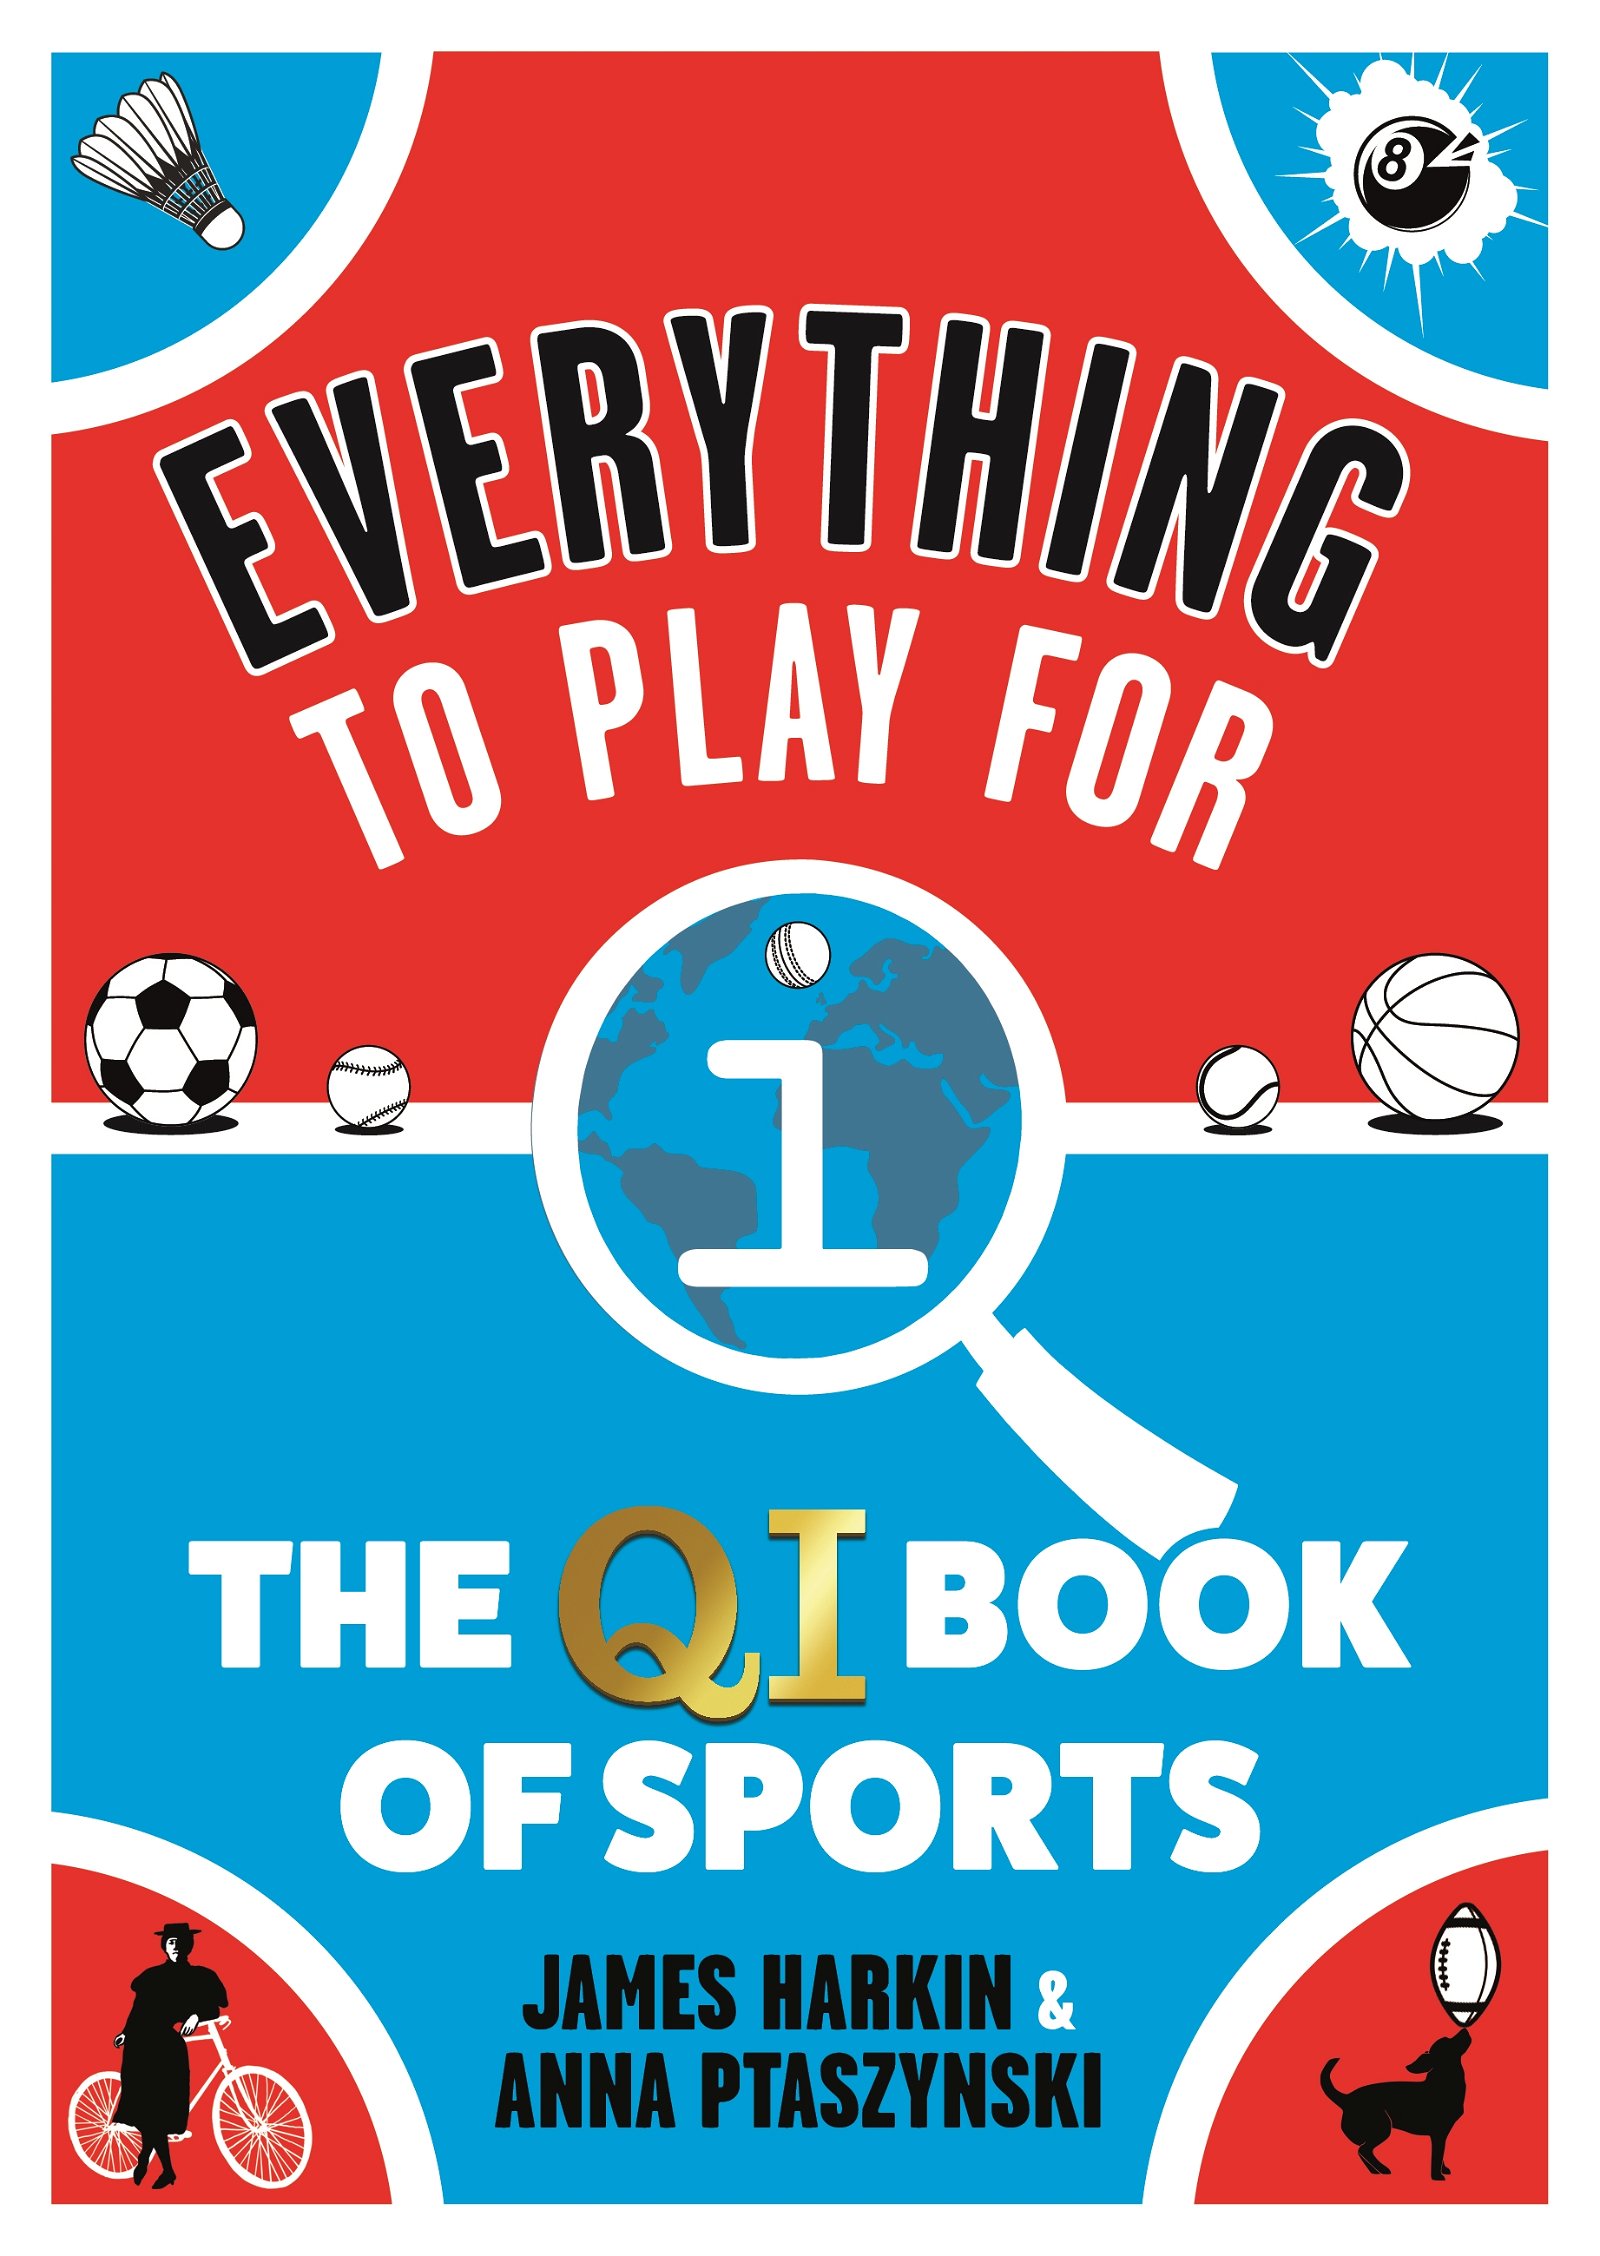 Everything to Play For: The QI Book of Sports, Books & Shop